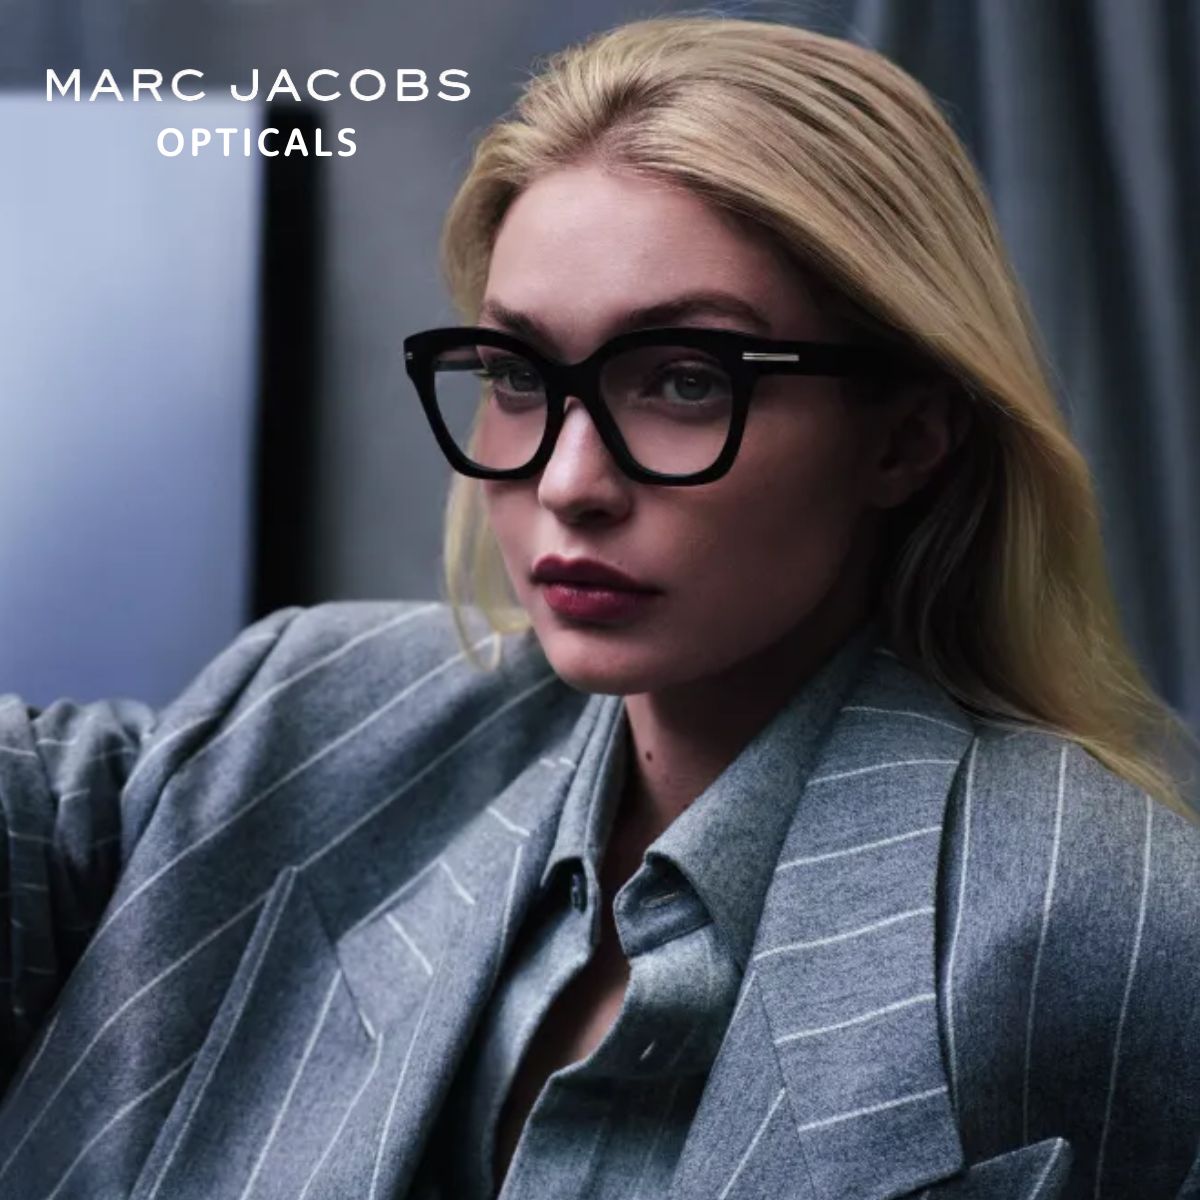 "Discover trendy, customizable Marc Jacobs Opticals eyeglasses at Optorium for men and women, offering premium designs and high-quality lenses."